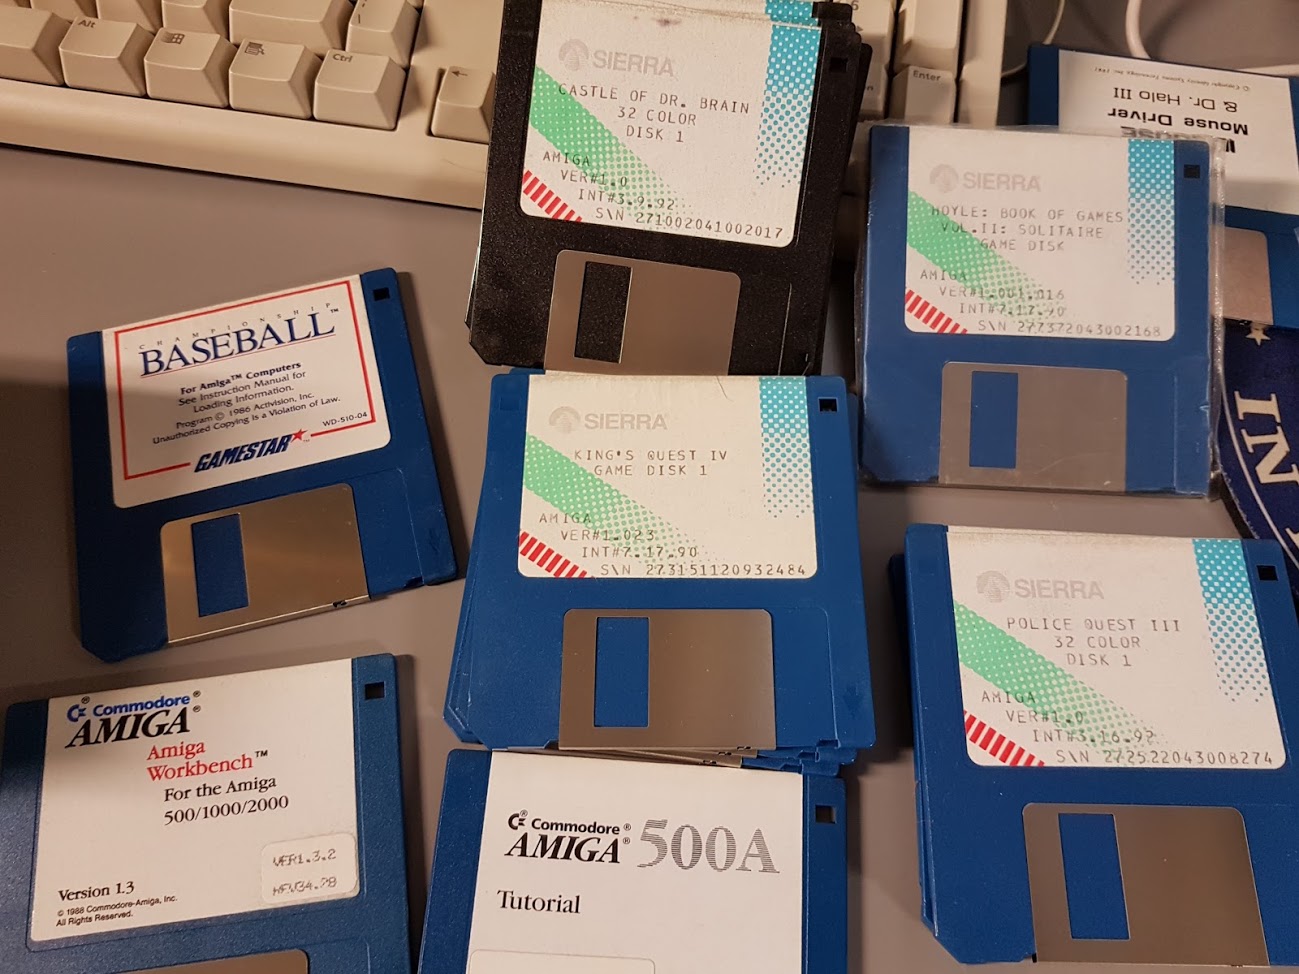 Various floppies including originals of some Sierra games.